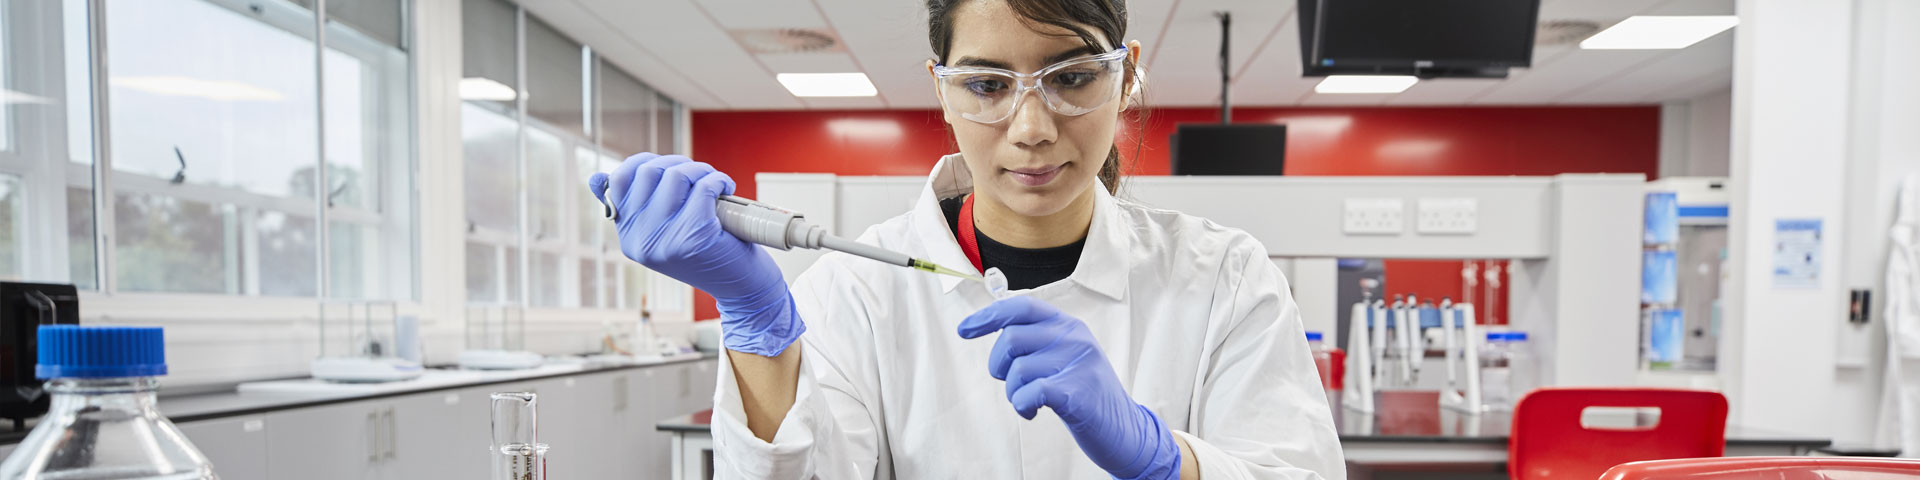 A woman in a lab coat wearing blue gloves and sat down in a lab fills a test tube.